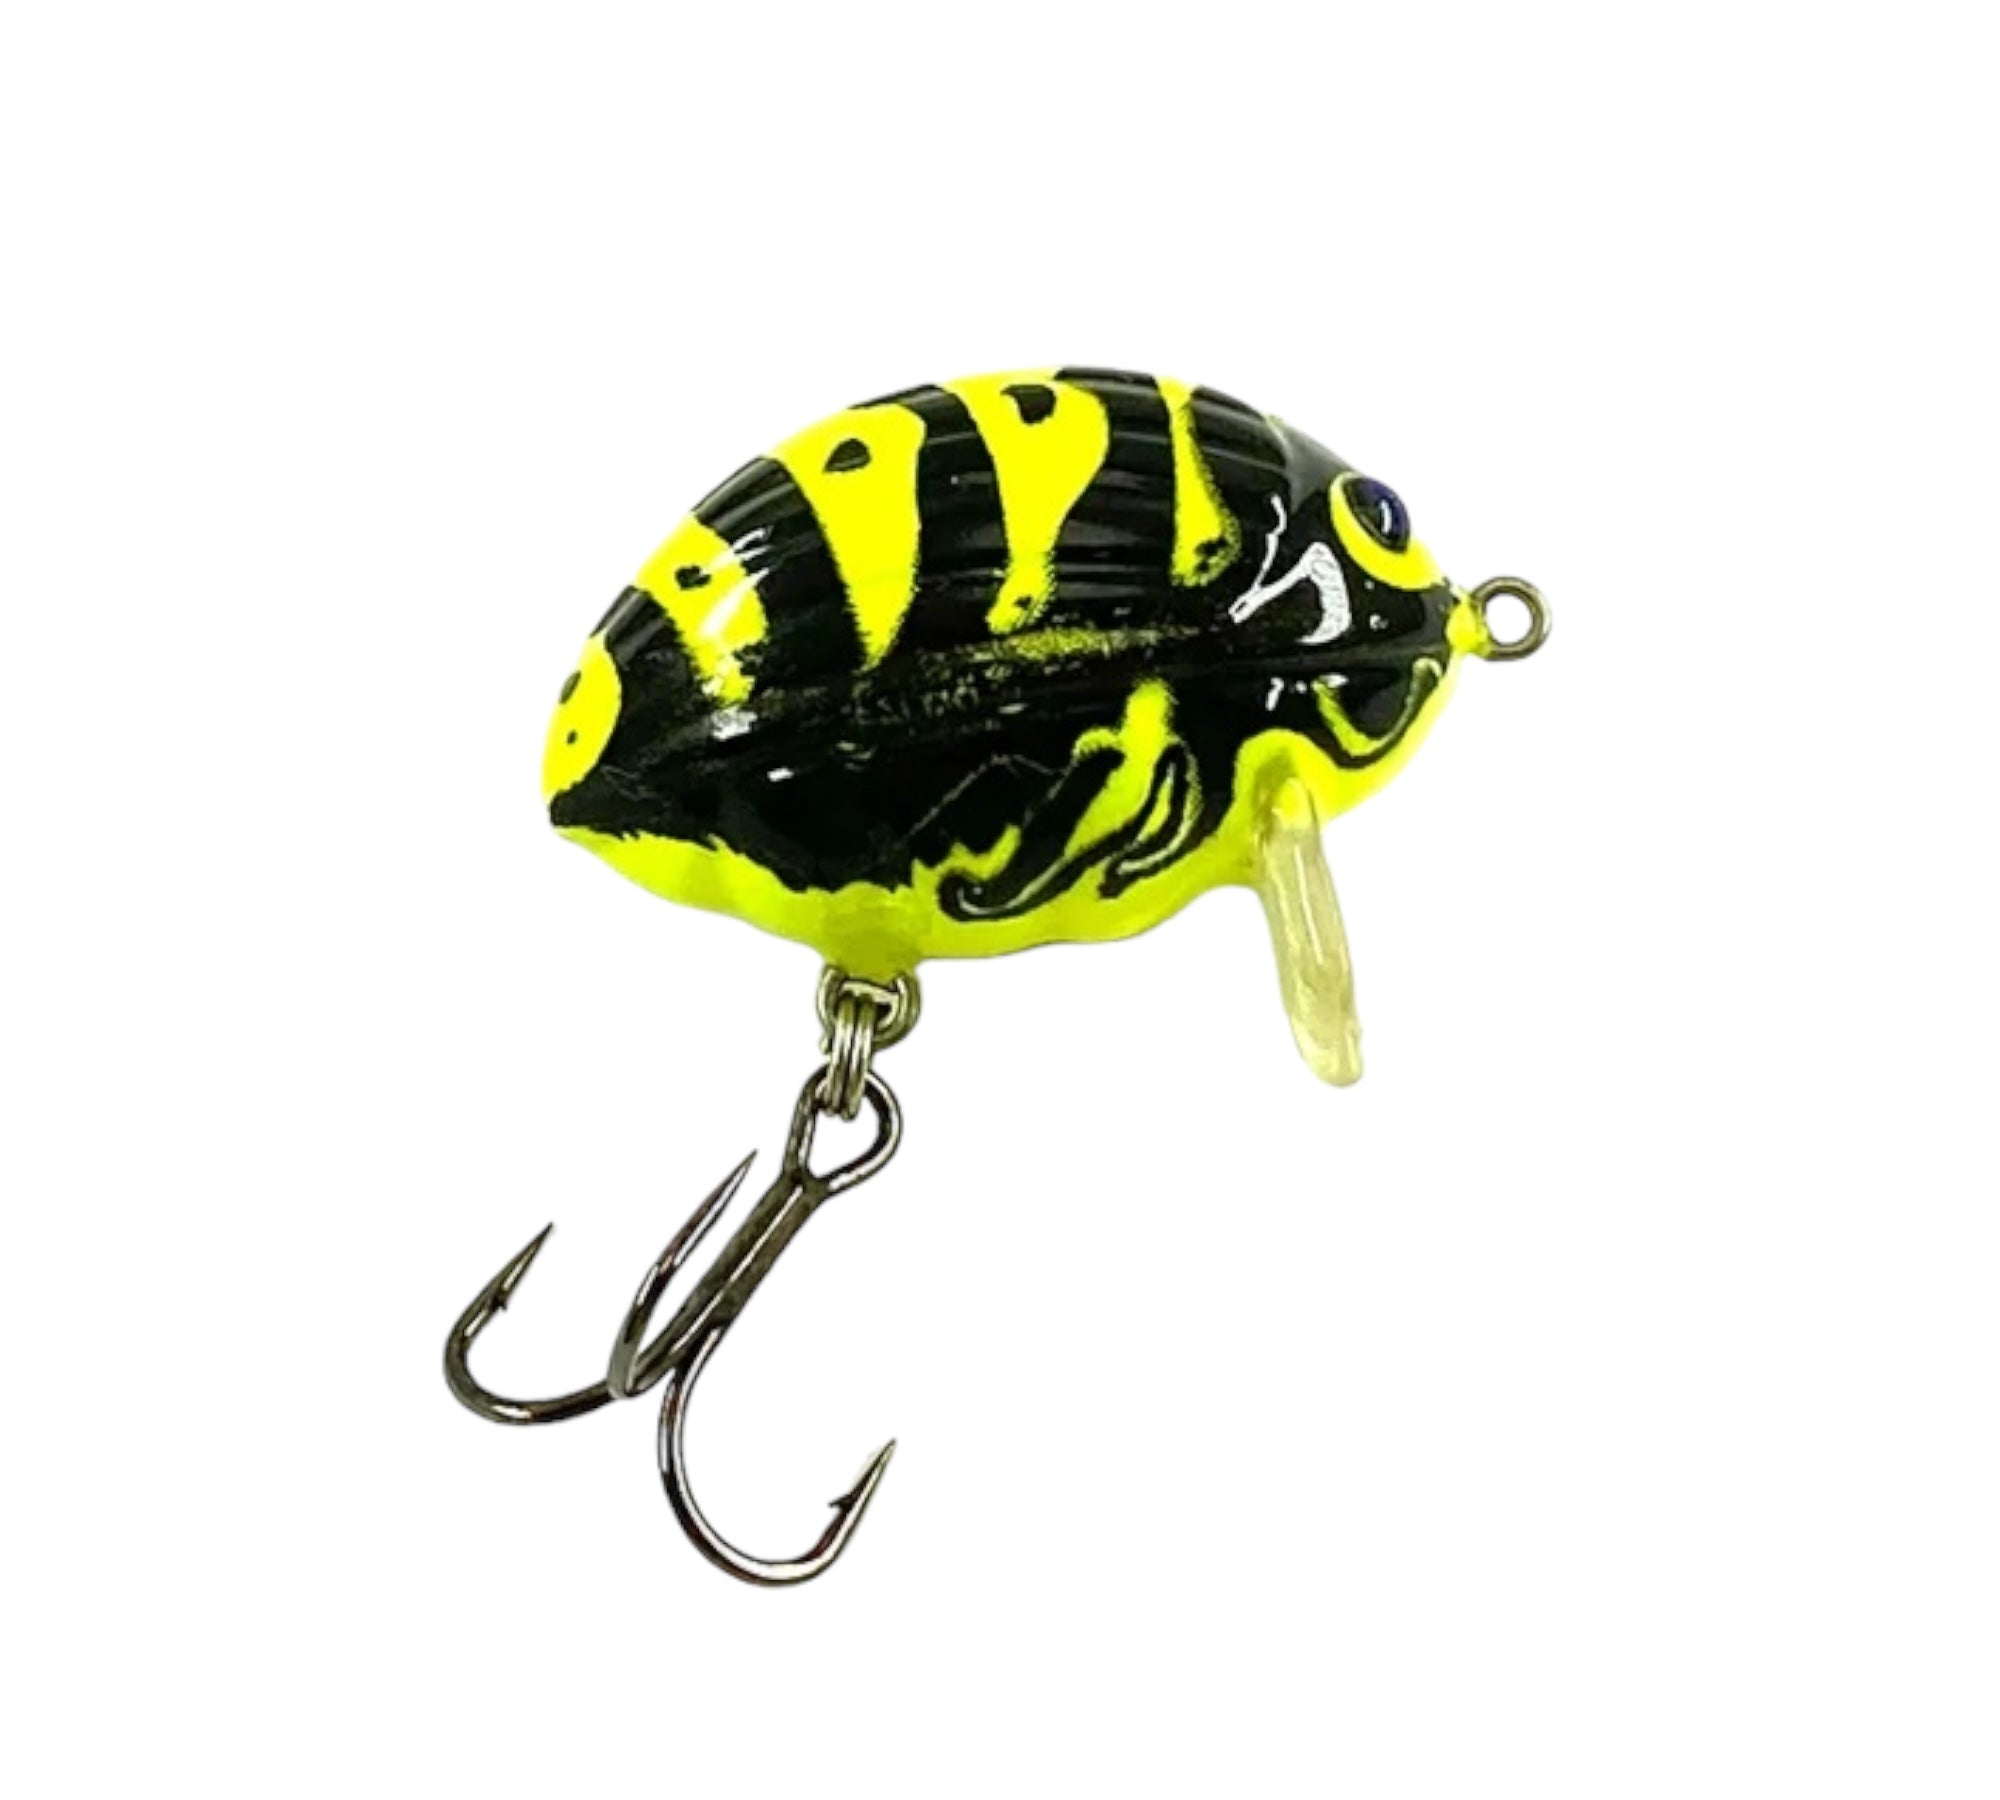 SALMO FISHING LURES LIL BUG 3 FLOATING • YLW BUMBLE BEE WASP – Toad Tackle